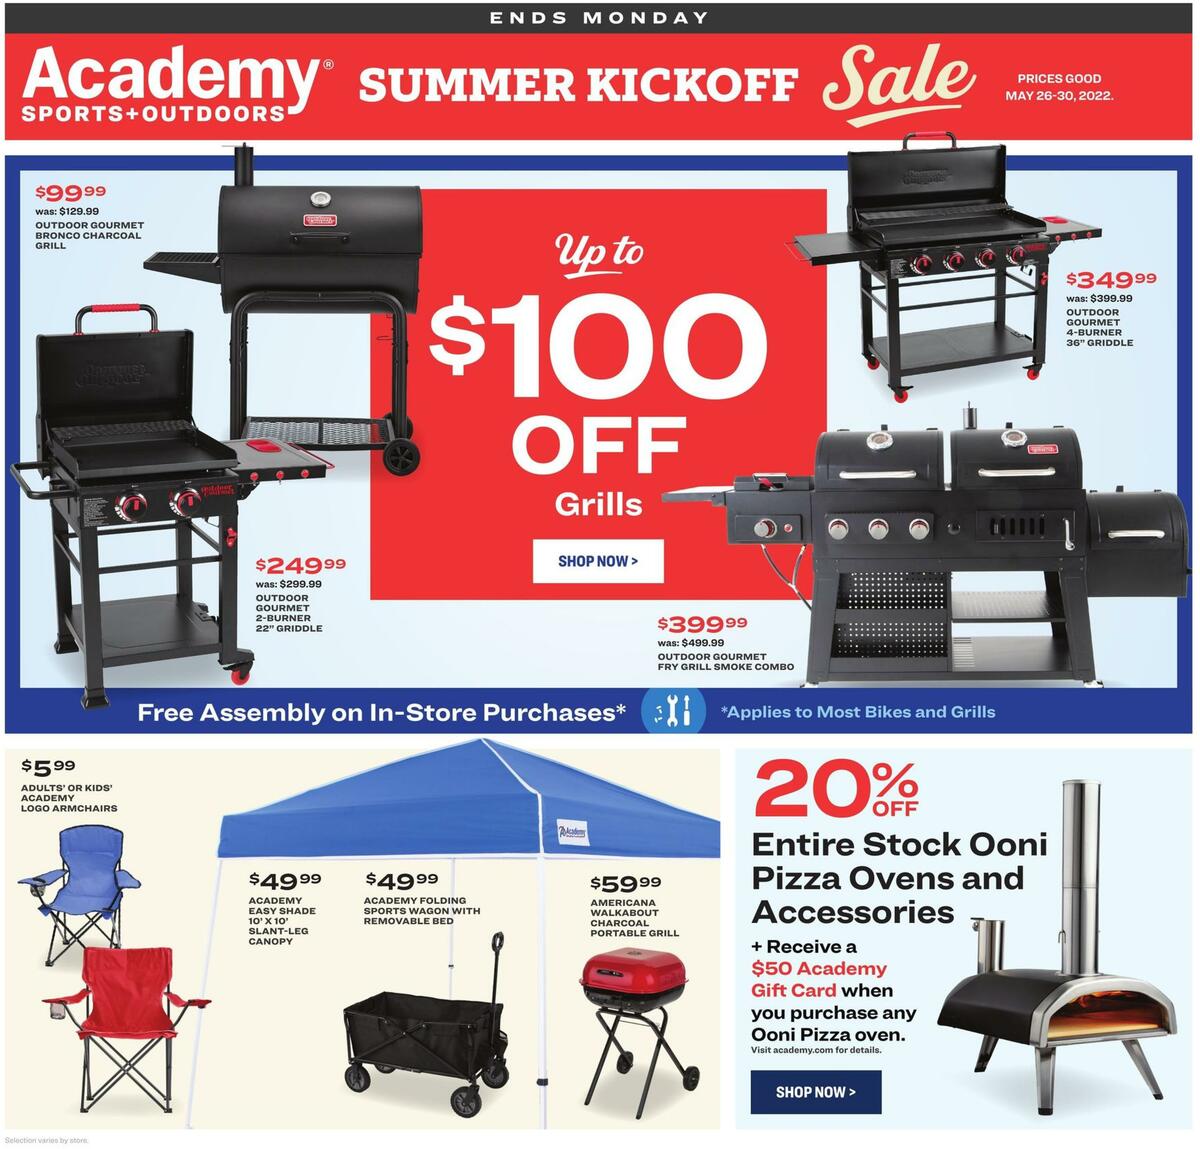 Academy Sports + Outdoors Kickoff Summer Sale Weekly Ad from May 26